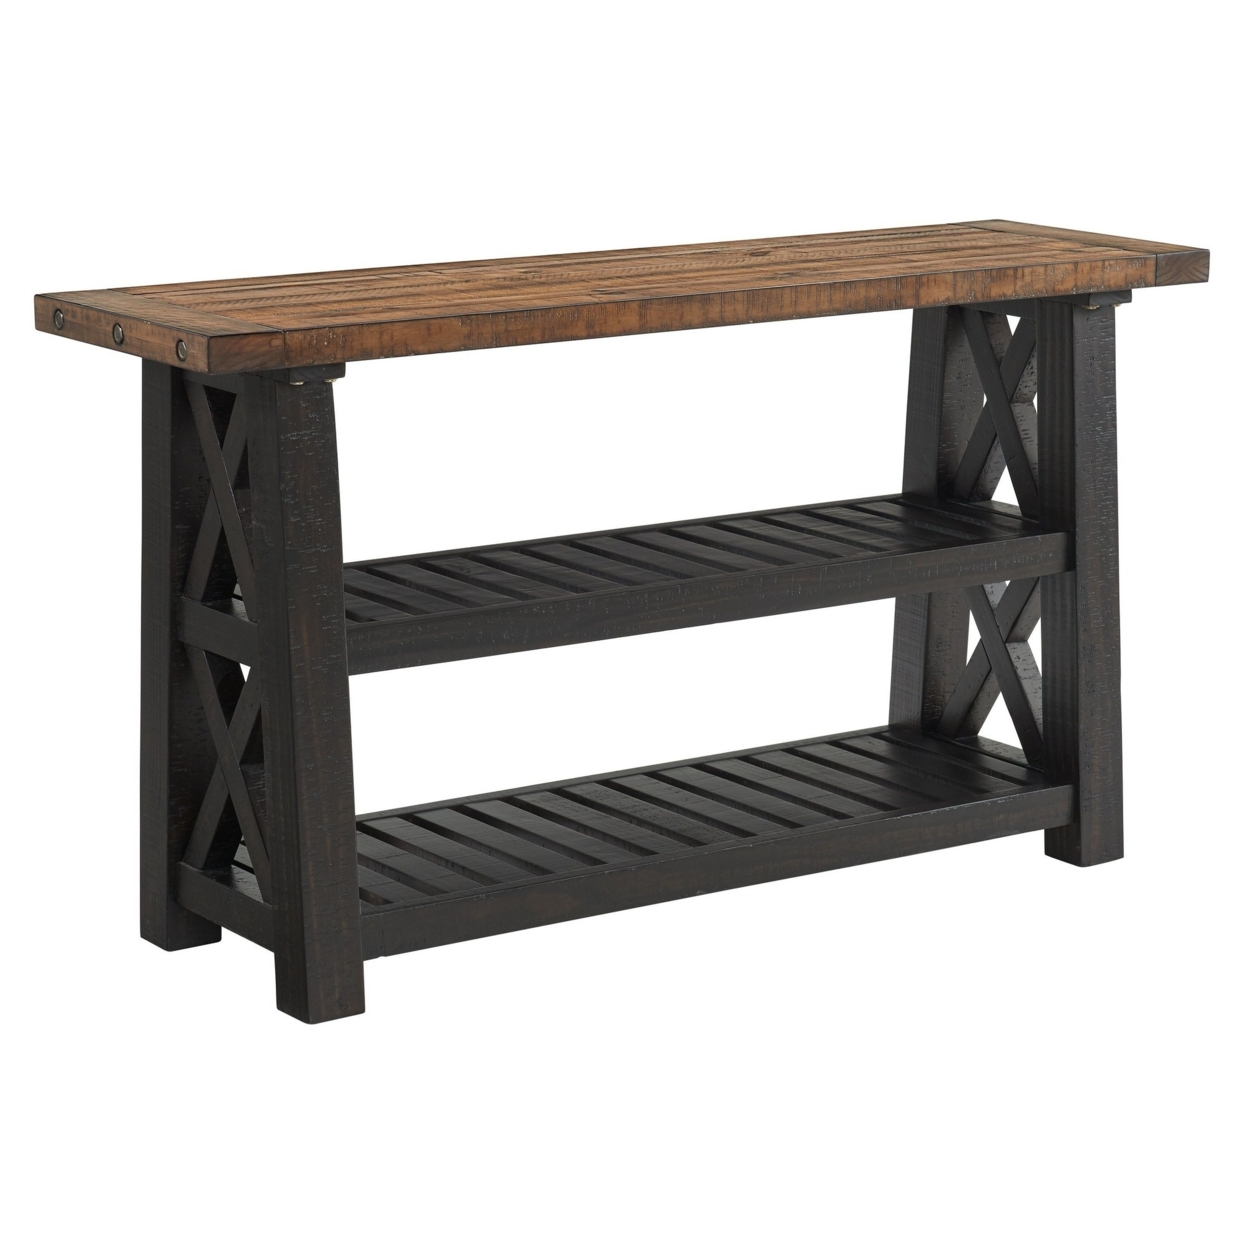 Sofa Table With 2 Slatted Shelves And X Legs, Brown And Black- Saltoro Sherpi